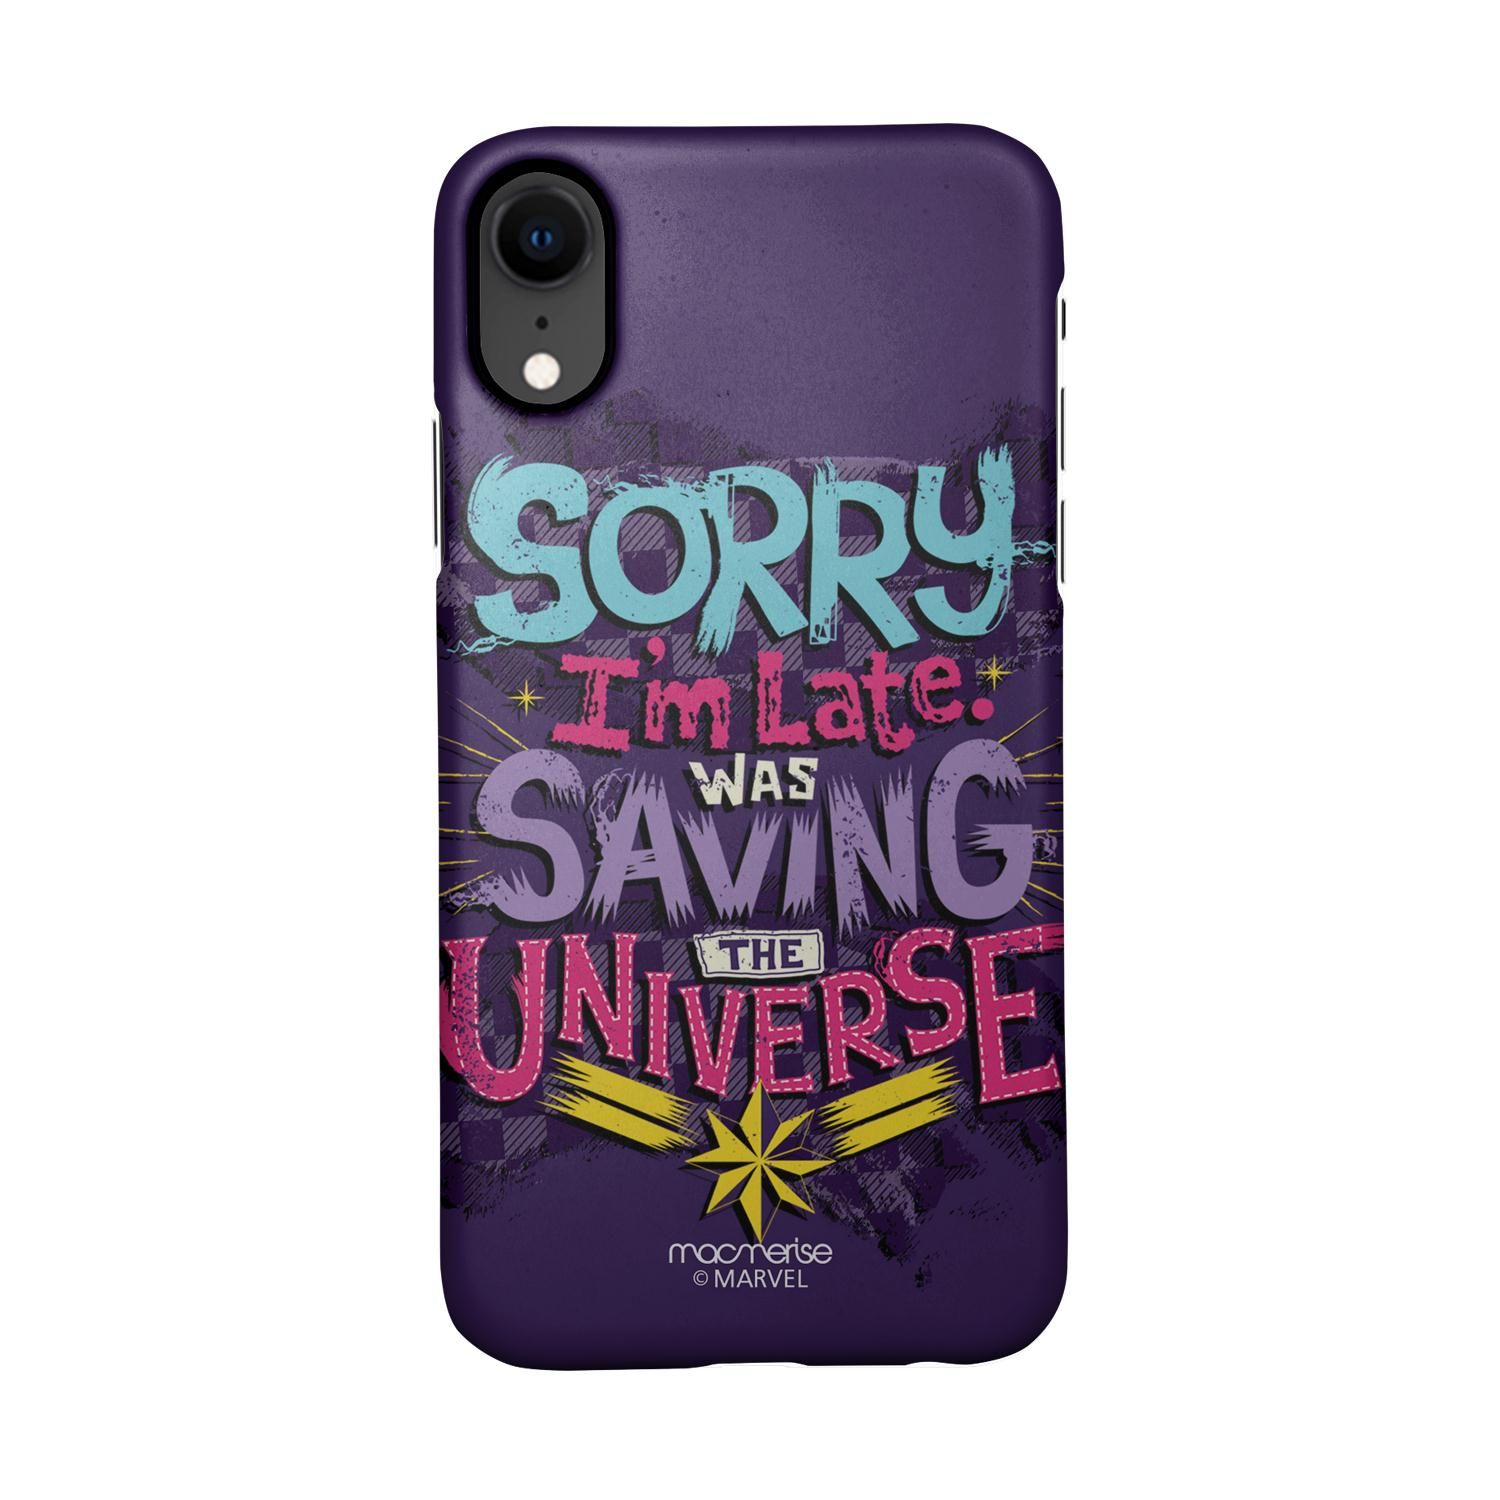 Buy Saving The Universe - Sleek Phone Case for iPhone XR Online